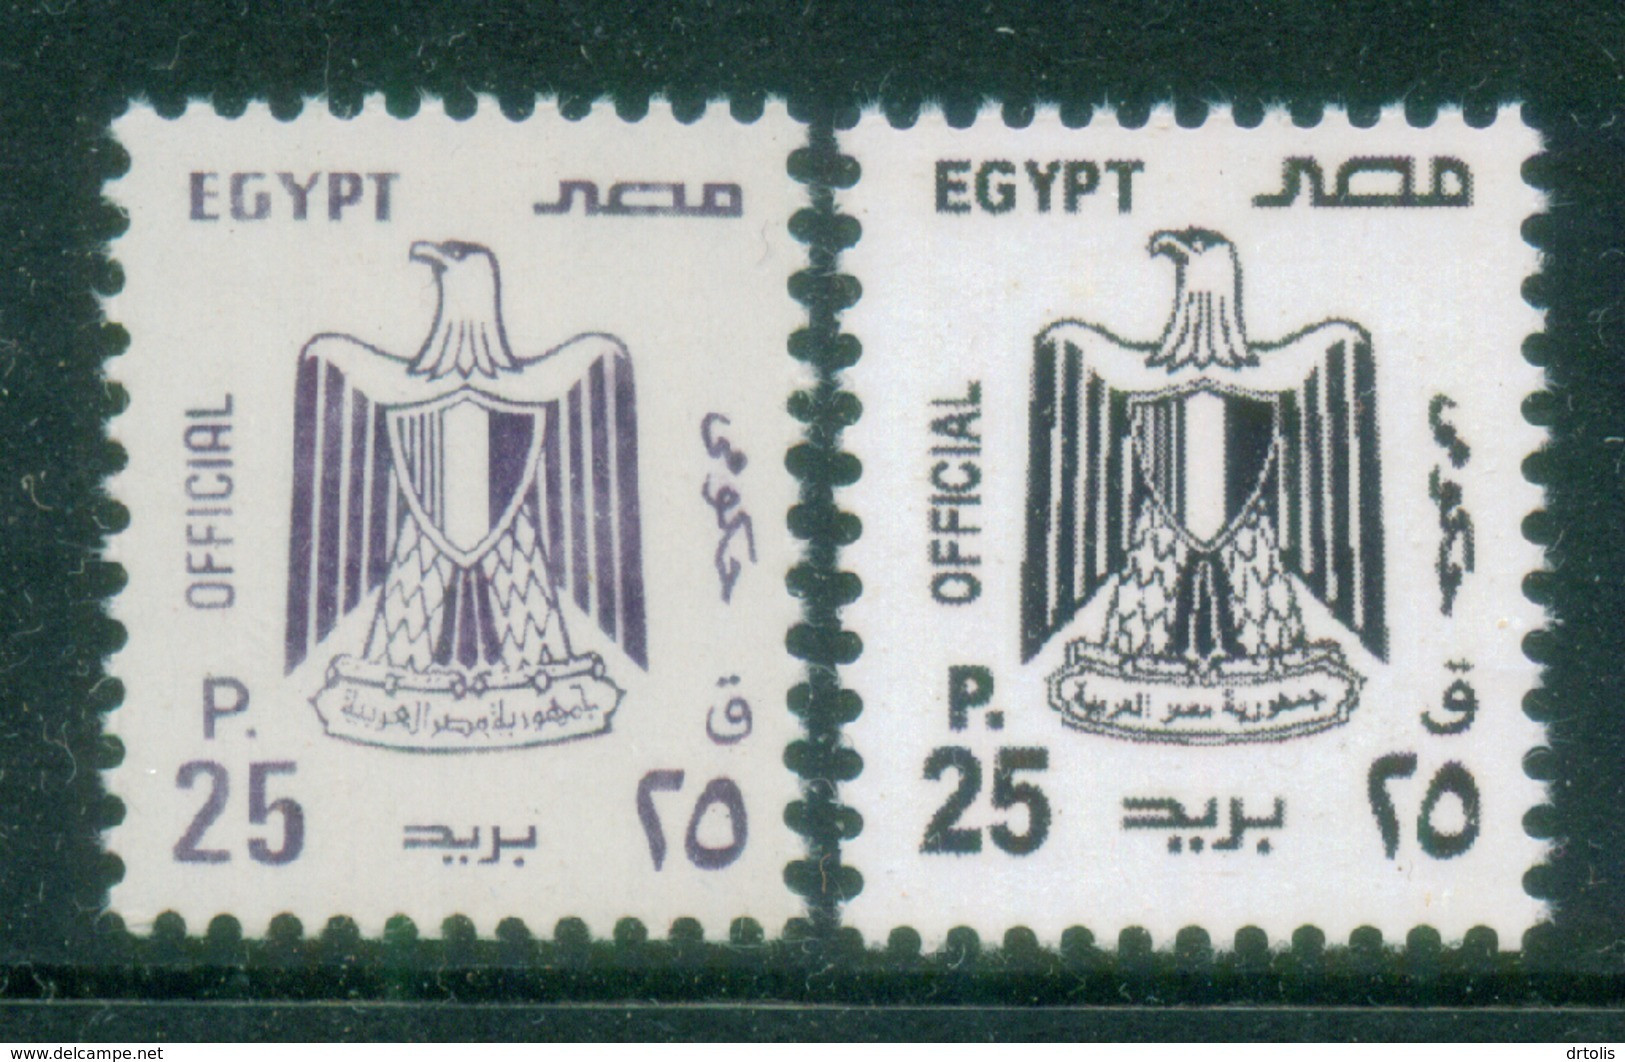 EGYPT / 2001 / OFFICIAL / 25 PT / NO WMK / VERY RARE : TYPE I & II / MNH / VF - Unused Stamps